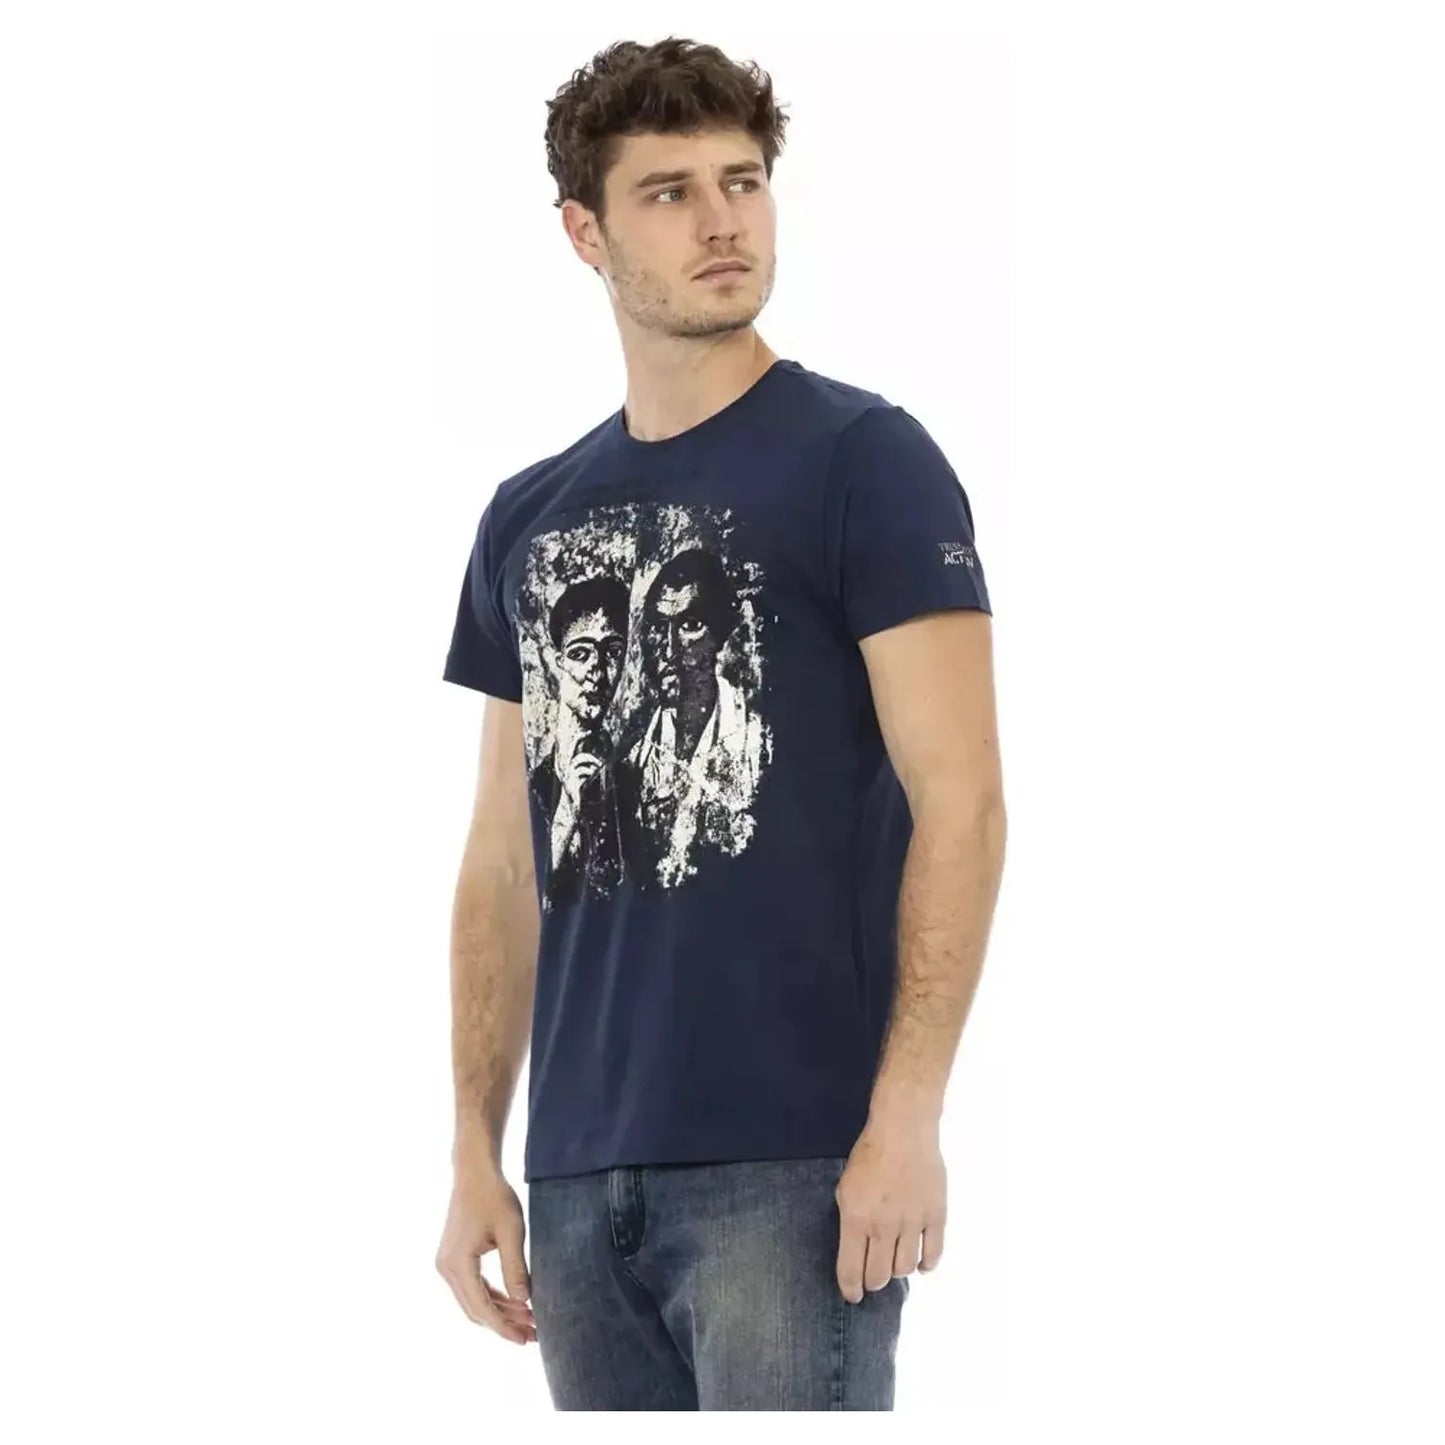 Trussardi Action Chic Blue Printed Tee with Short Sleeves blue-cotton-t-shirt-19 product-22817-1071734675-22-3e1da54f-60a.webp